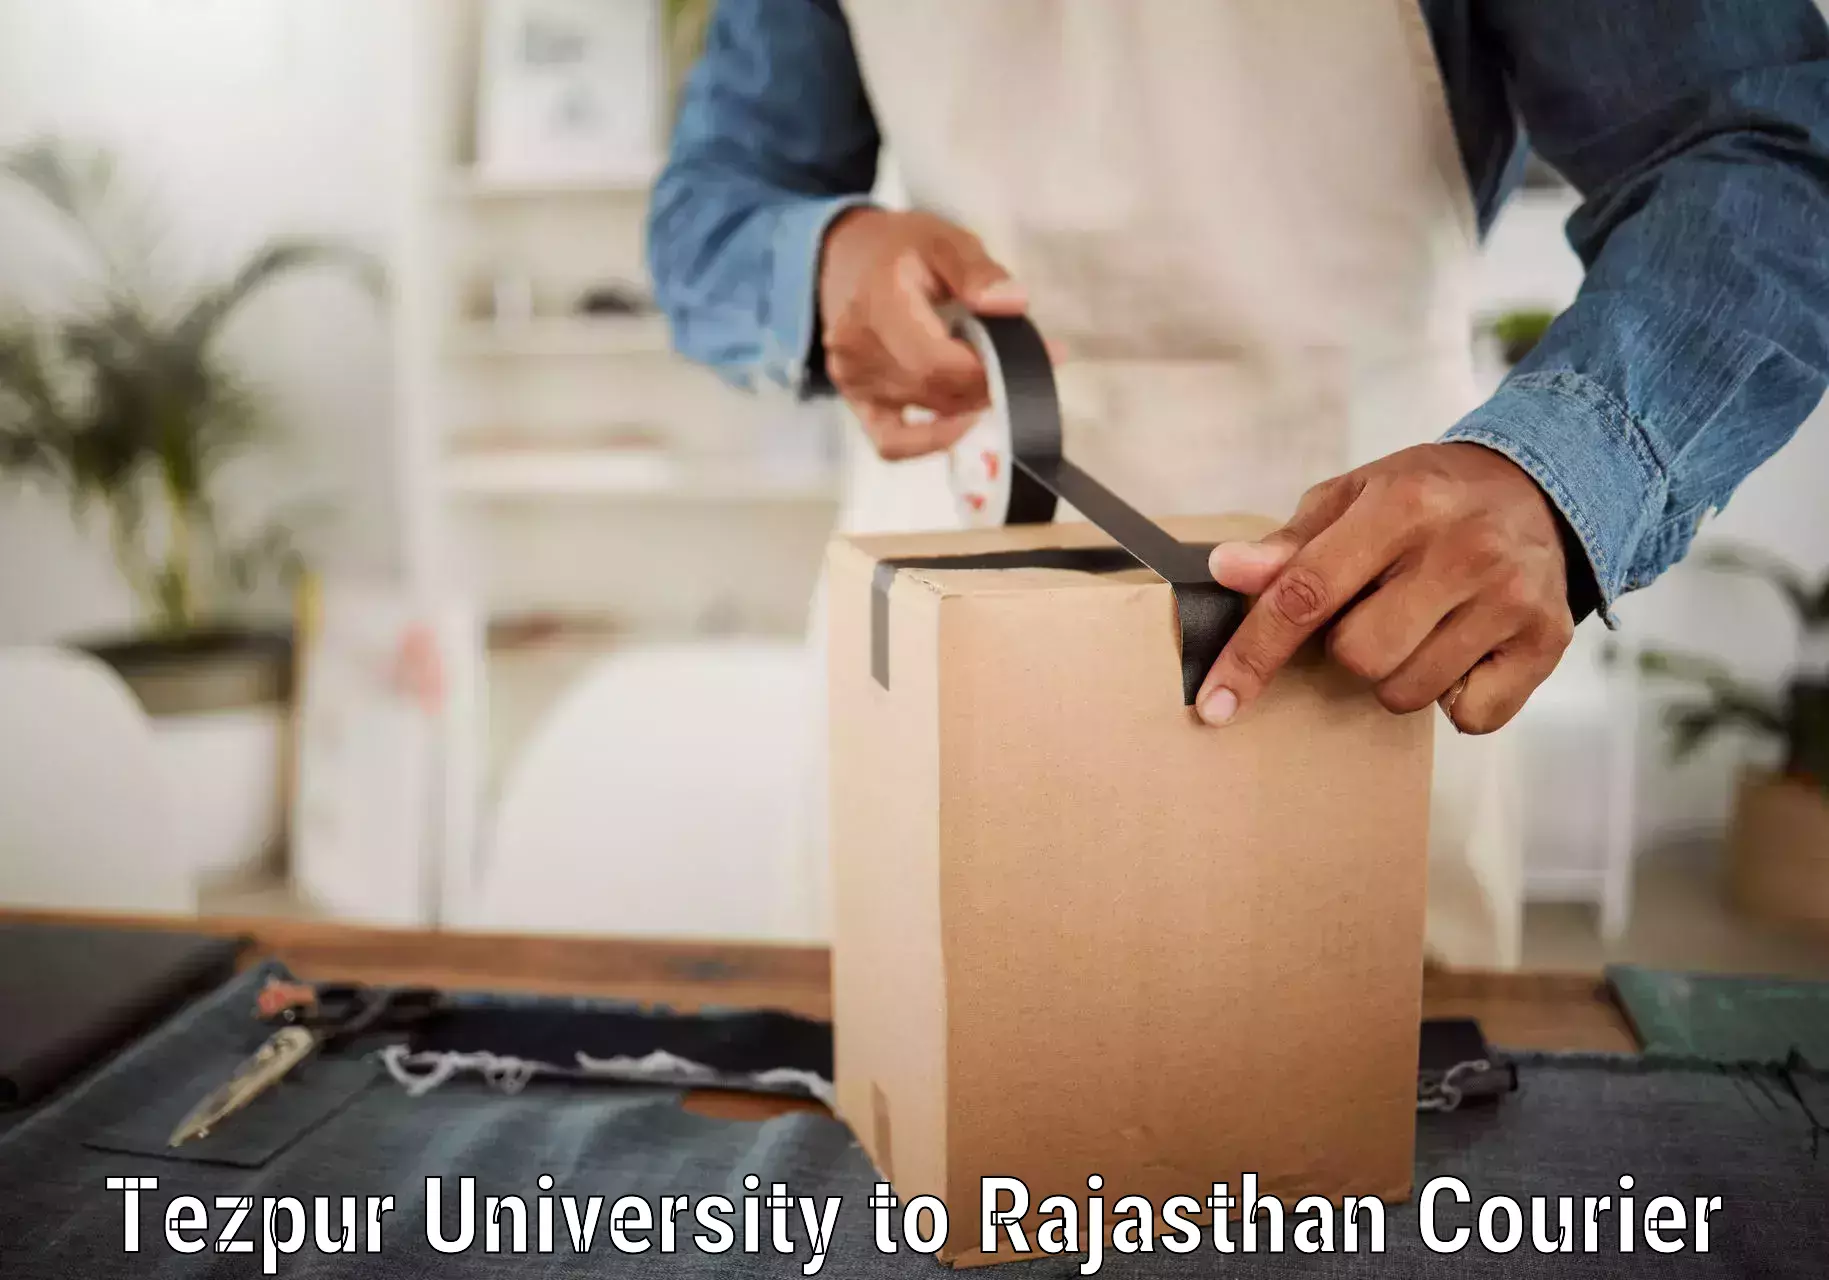 Next day courier Tezpur University to Rajasthan